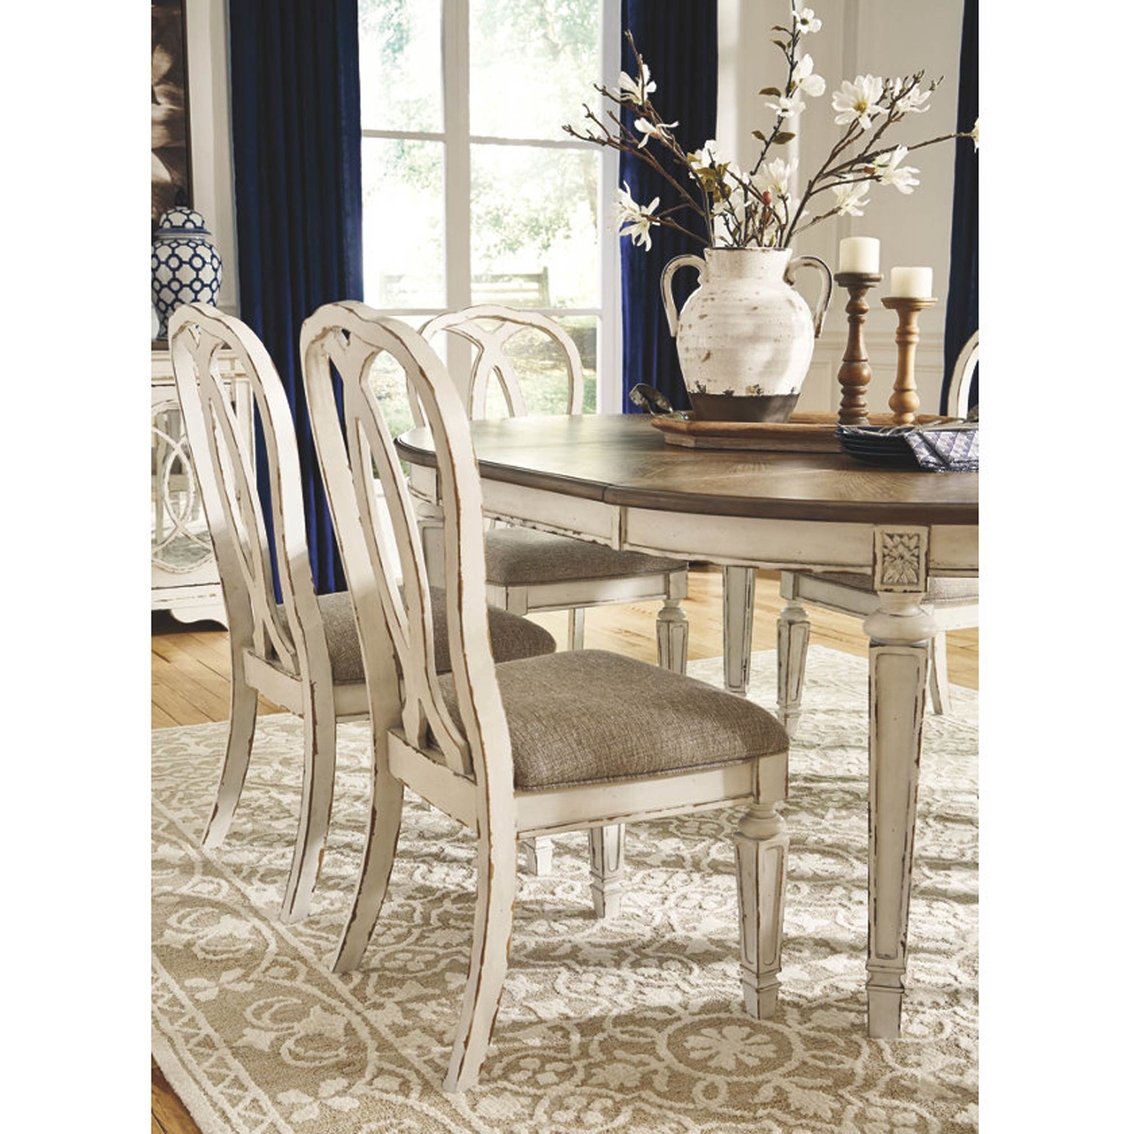 Signature Design by Ashley Realyn 7 pc. Oval Dining Set with Ribbon Back Chairs - Image 4 of 6